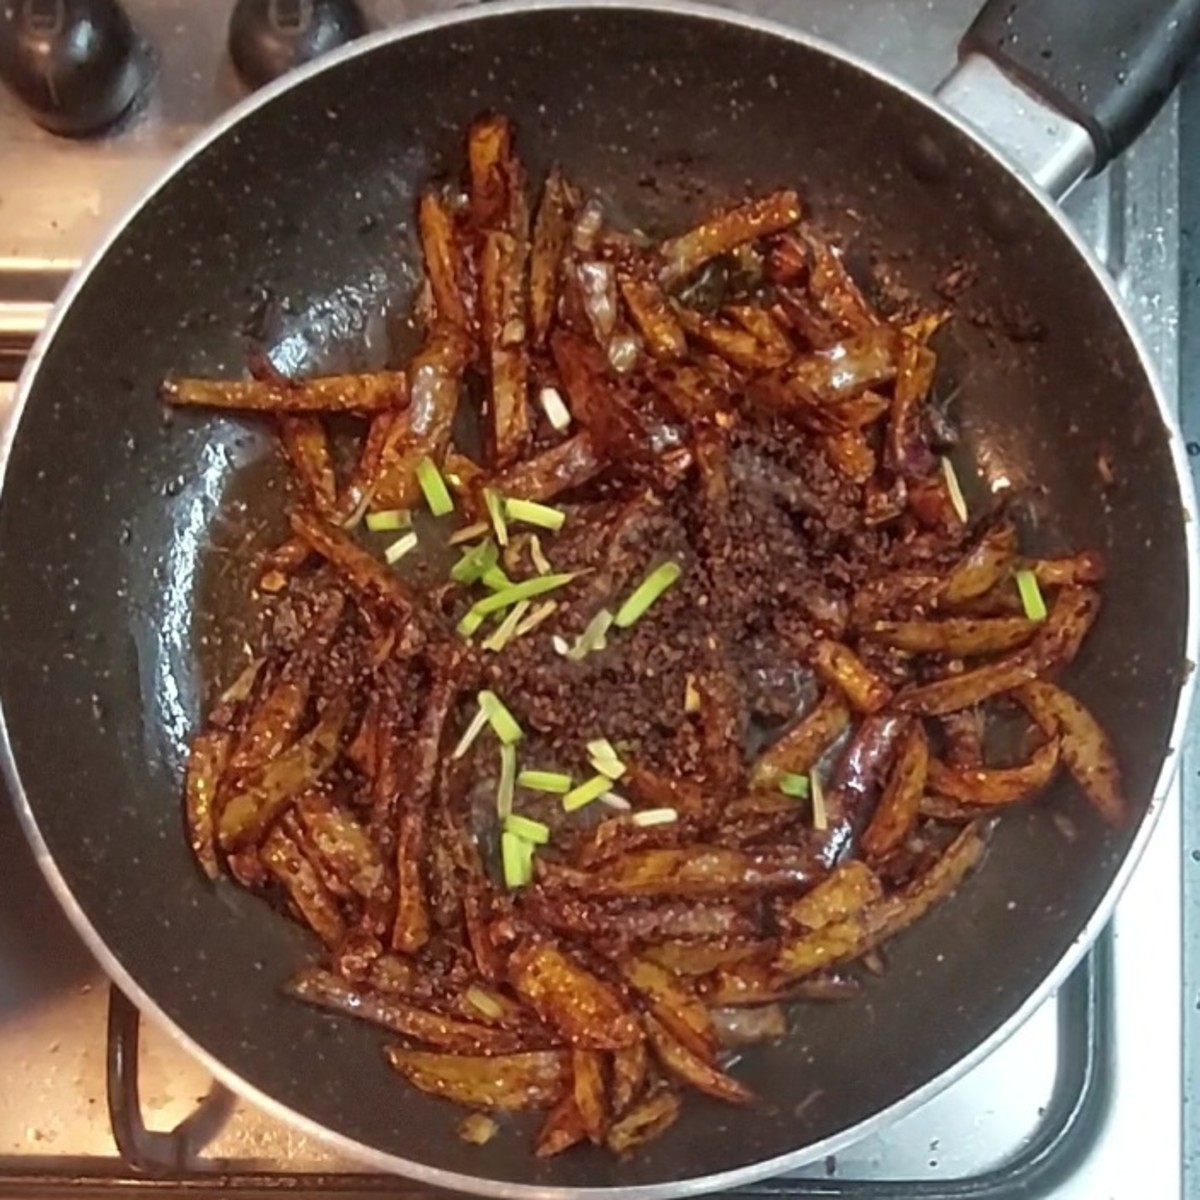 Mix the fried potatoes well with the sauces. Add fried sesame seeds, 1 tablespoon and chopped spring onion. Mix well and switch off the flame.